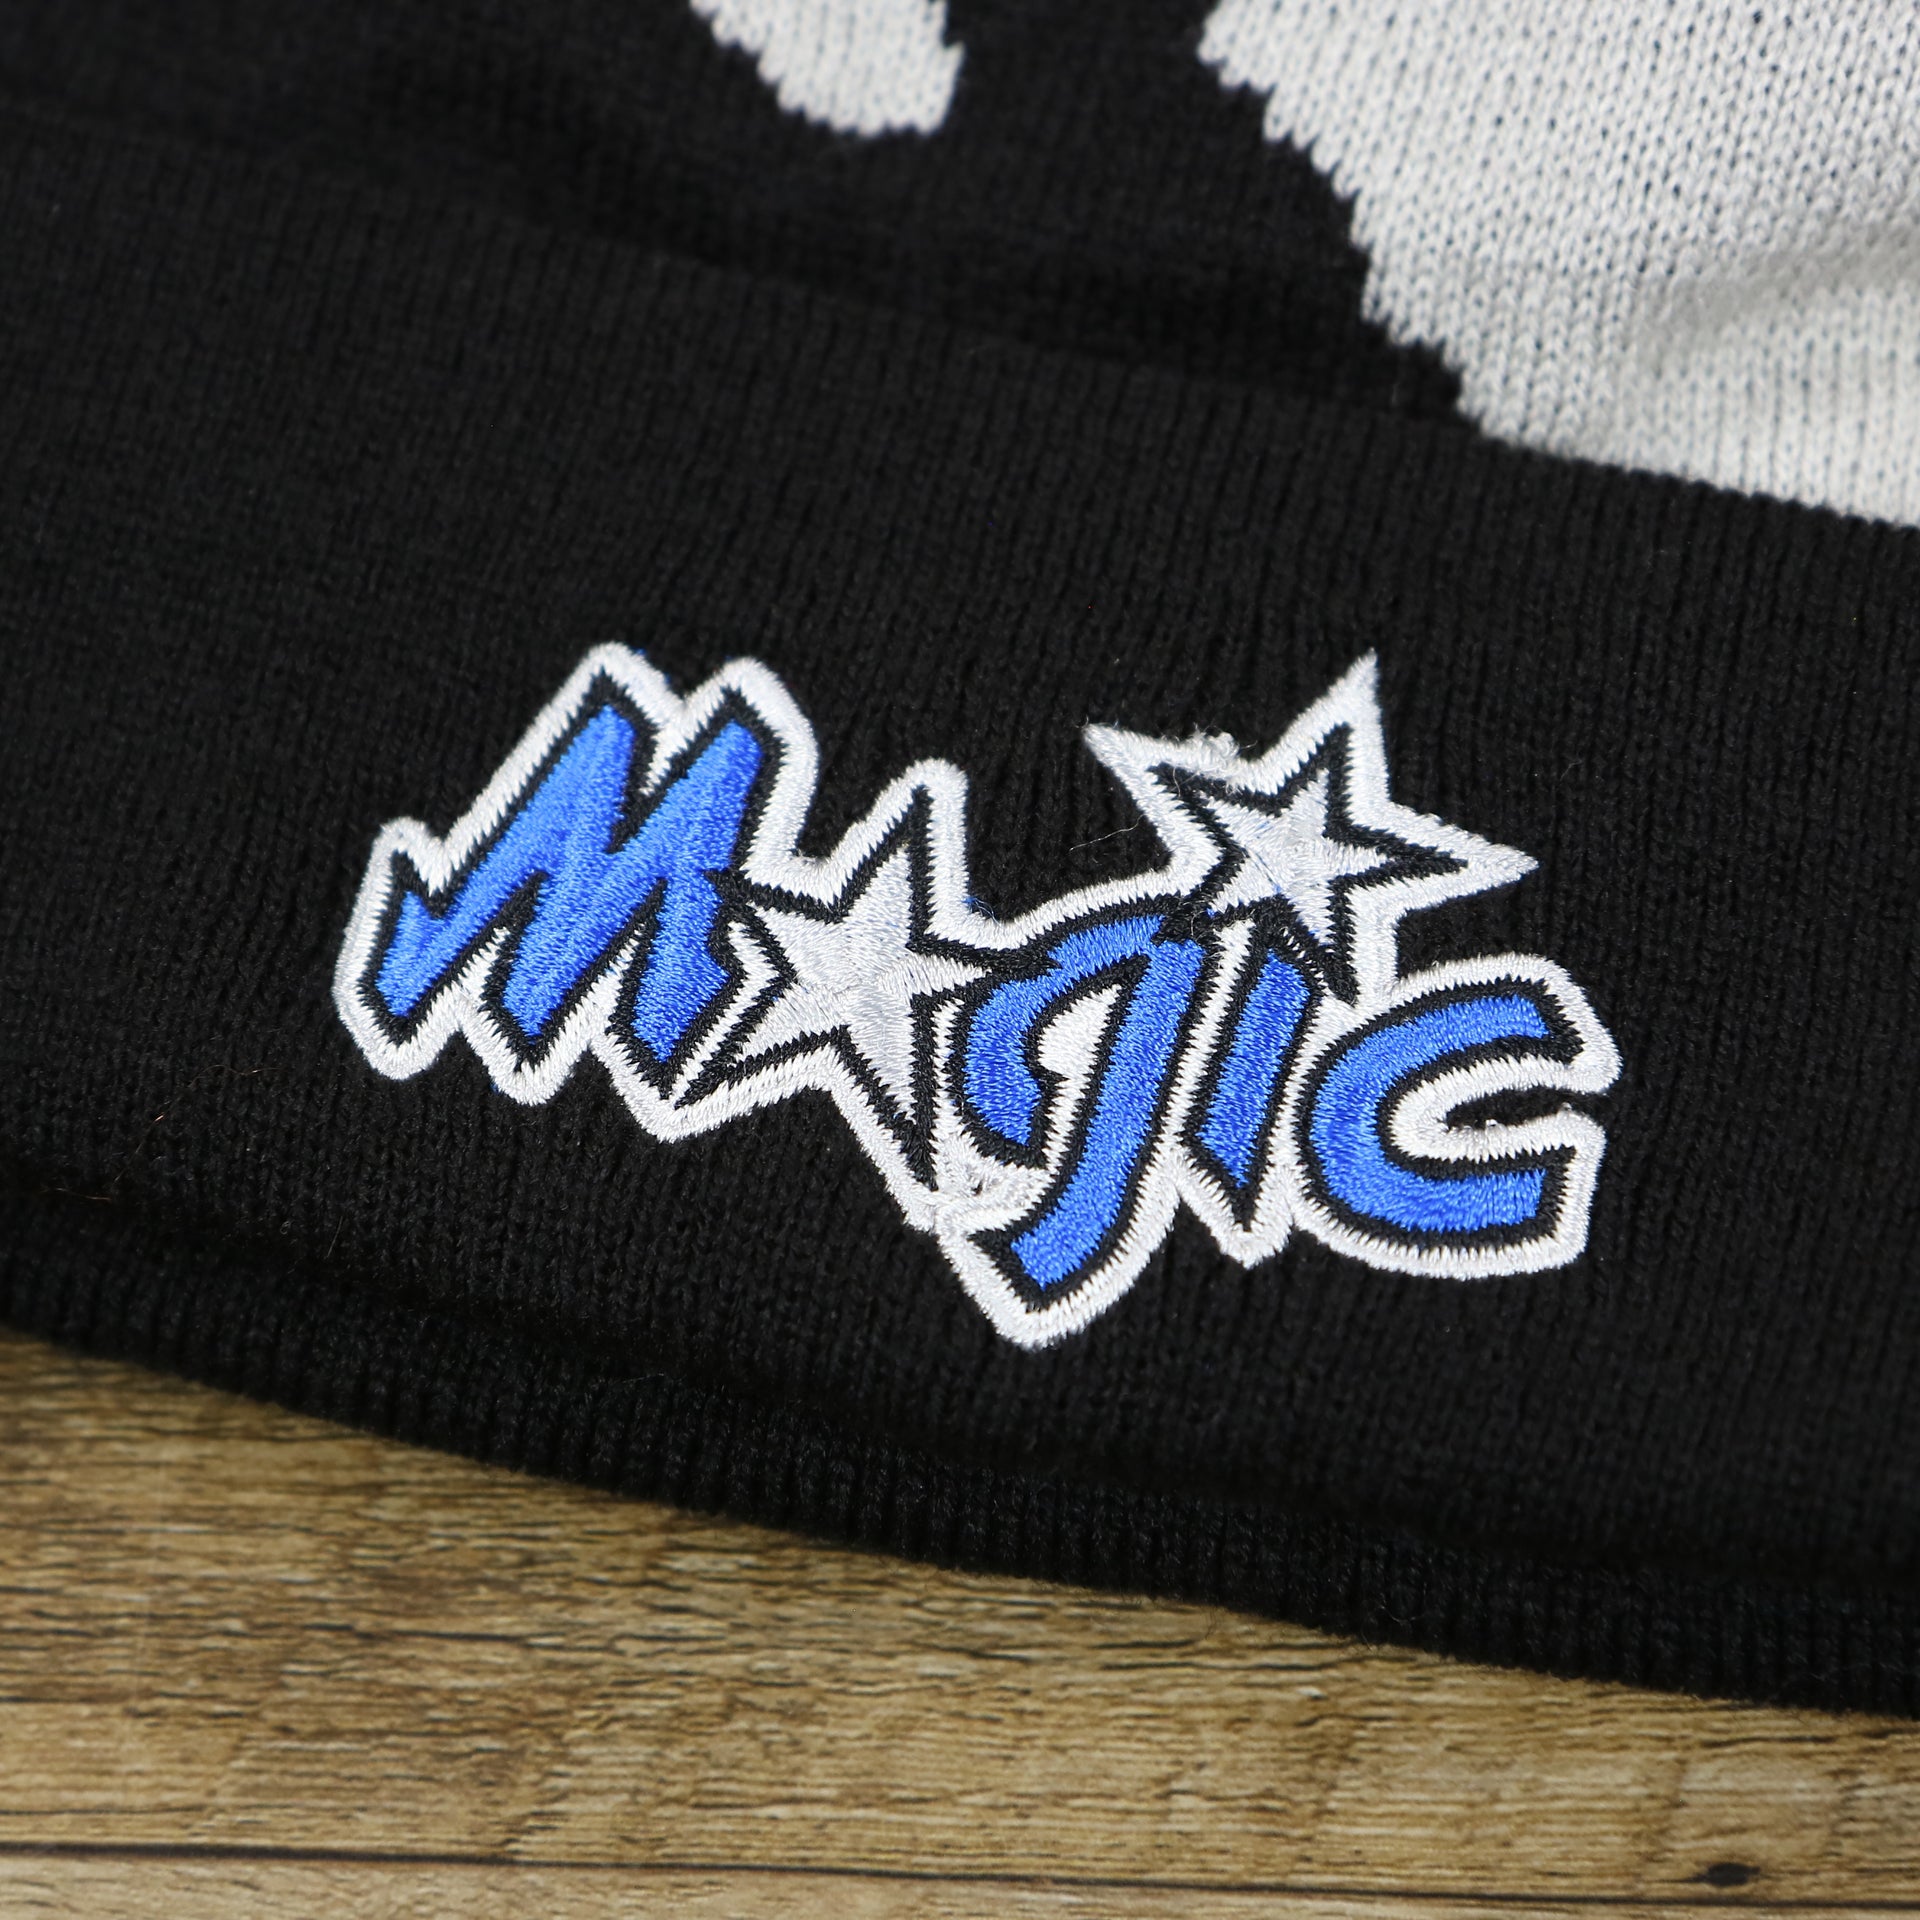 The Magic Logo on the Orlando Magics Paint Brush Cuffed Winter Beanie With Pom Pom | Black, Gray, And Blue Winter Beanie